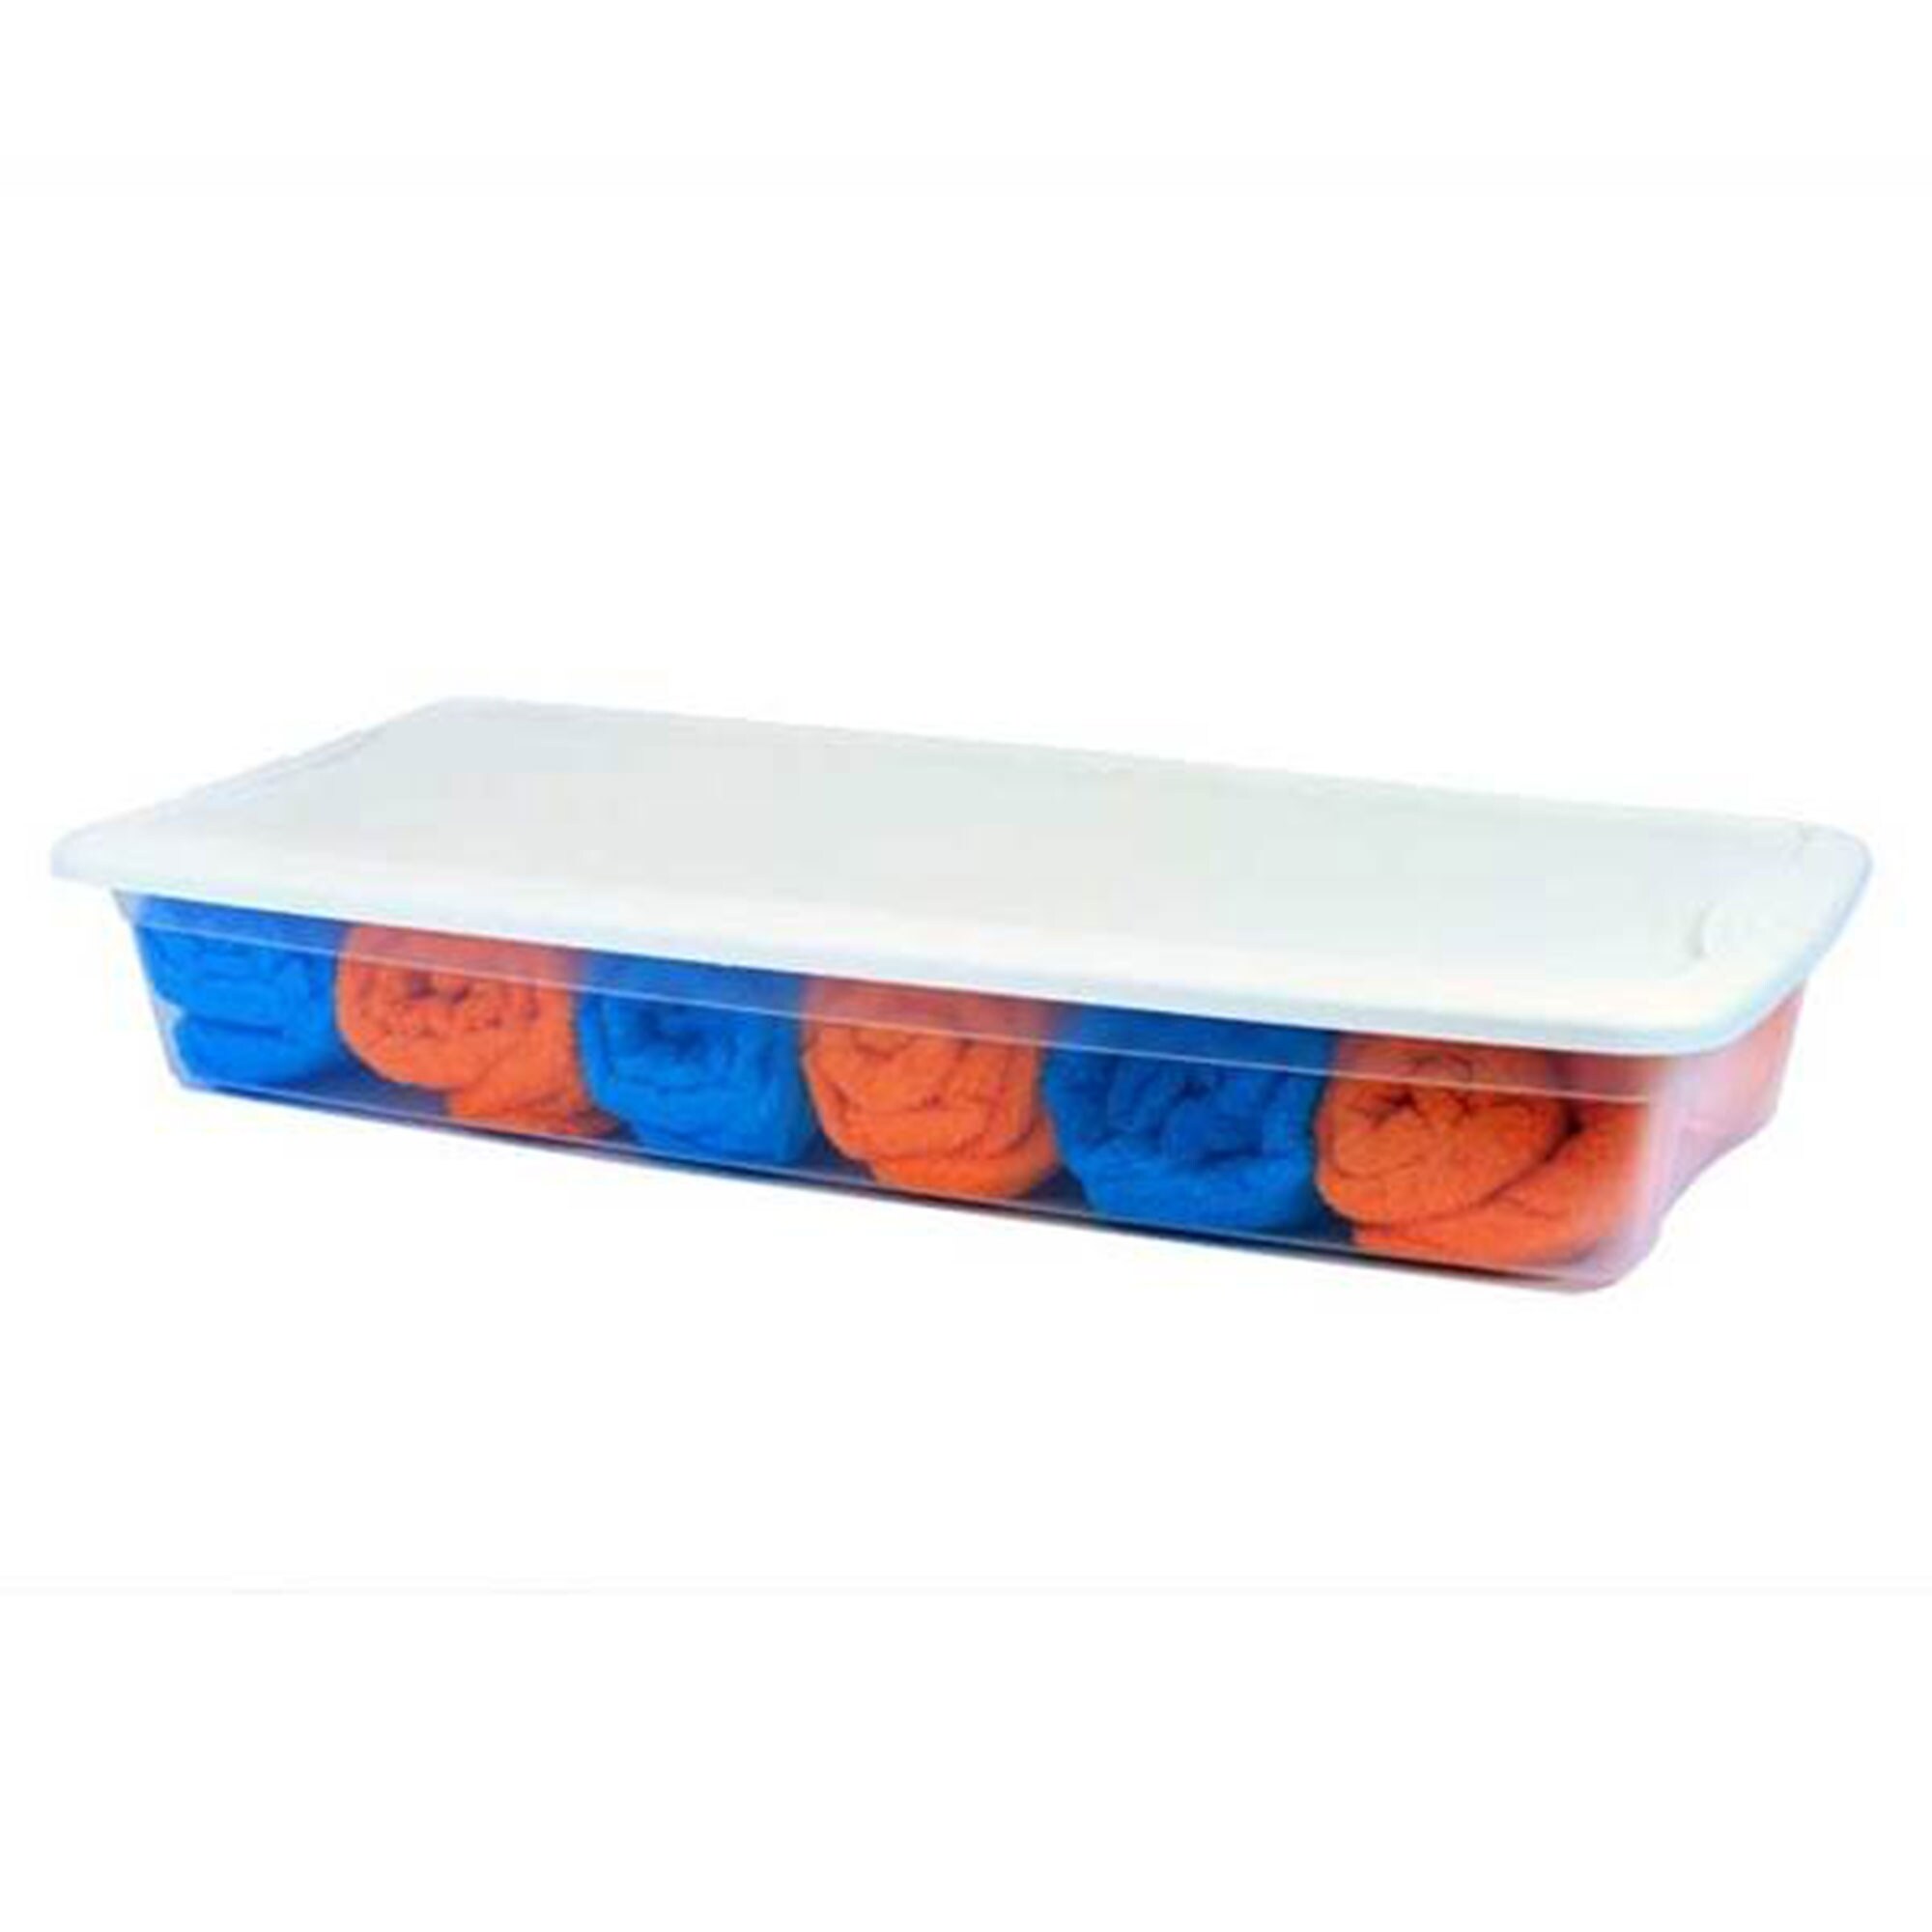 https://ak1.ostkcdn.com/images/products/is/images/direct/3b4504753dcf9ea6313a89f2496f6e711aaa4ed7/Sterilite-41-Quart-Lightweight-Under-Bed-Storage-Box-Container-with-Lid%2C-12-Pack.jpg